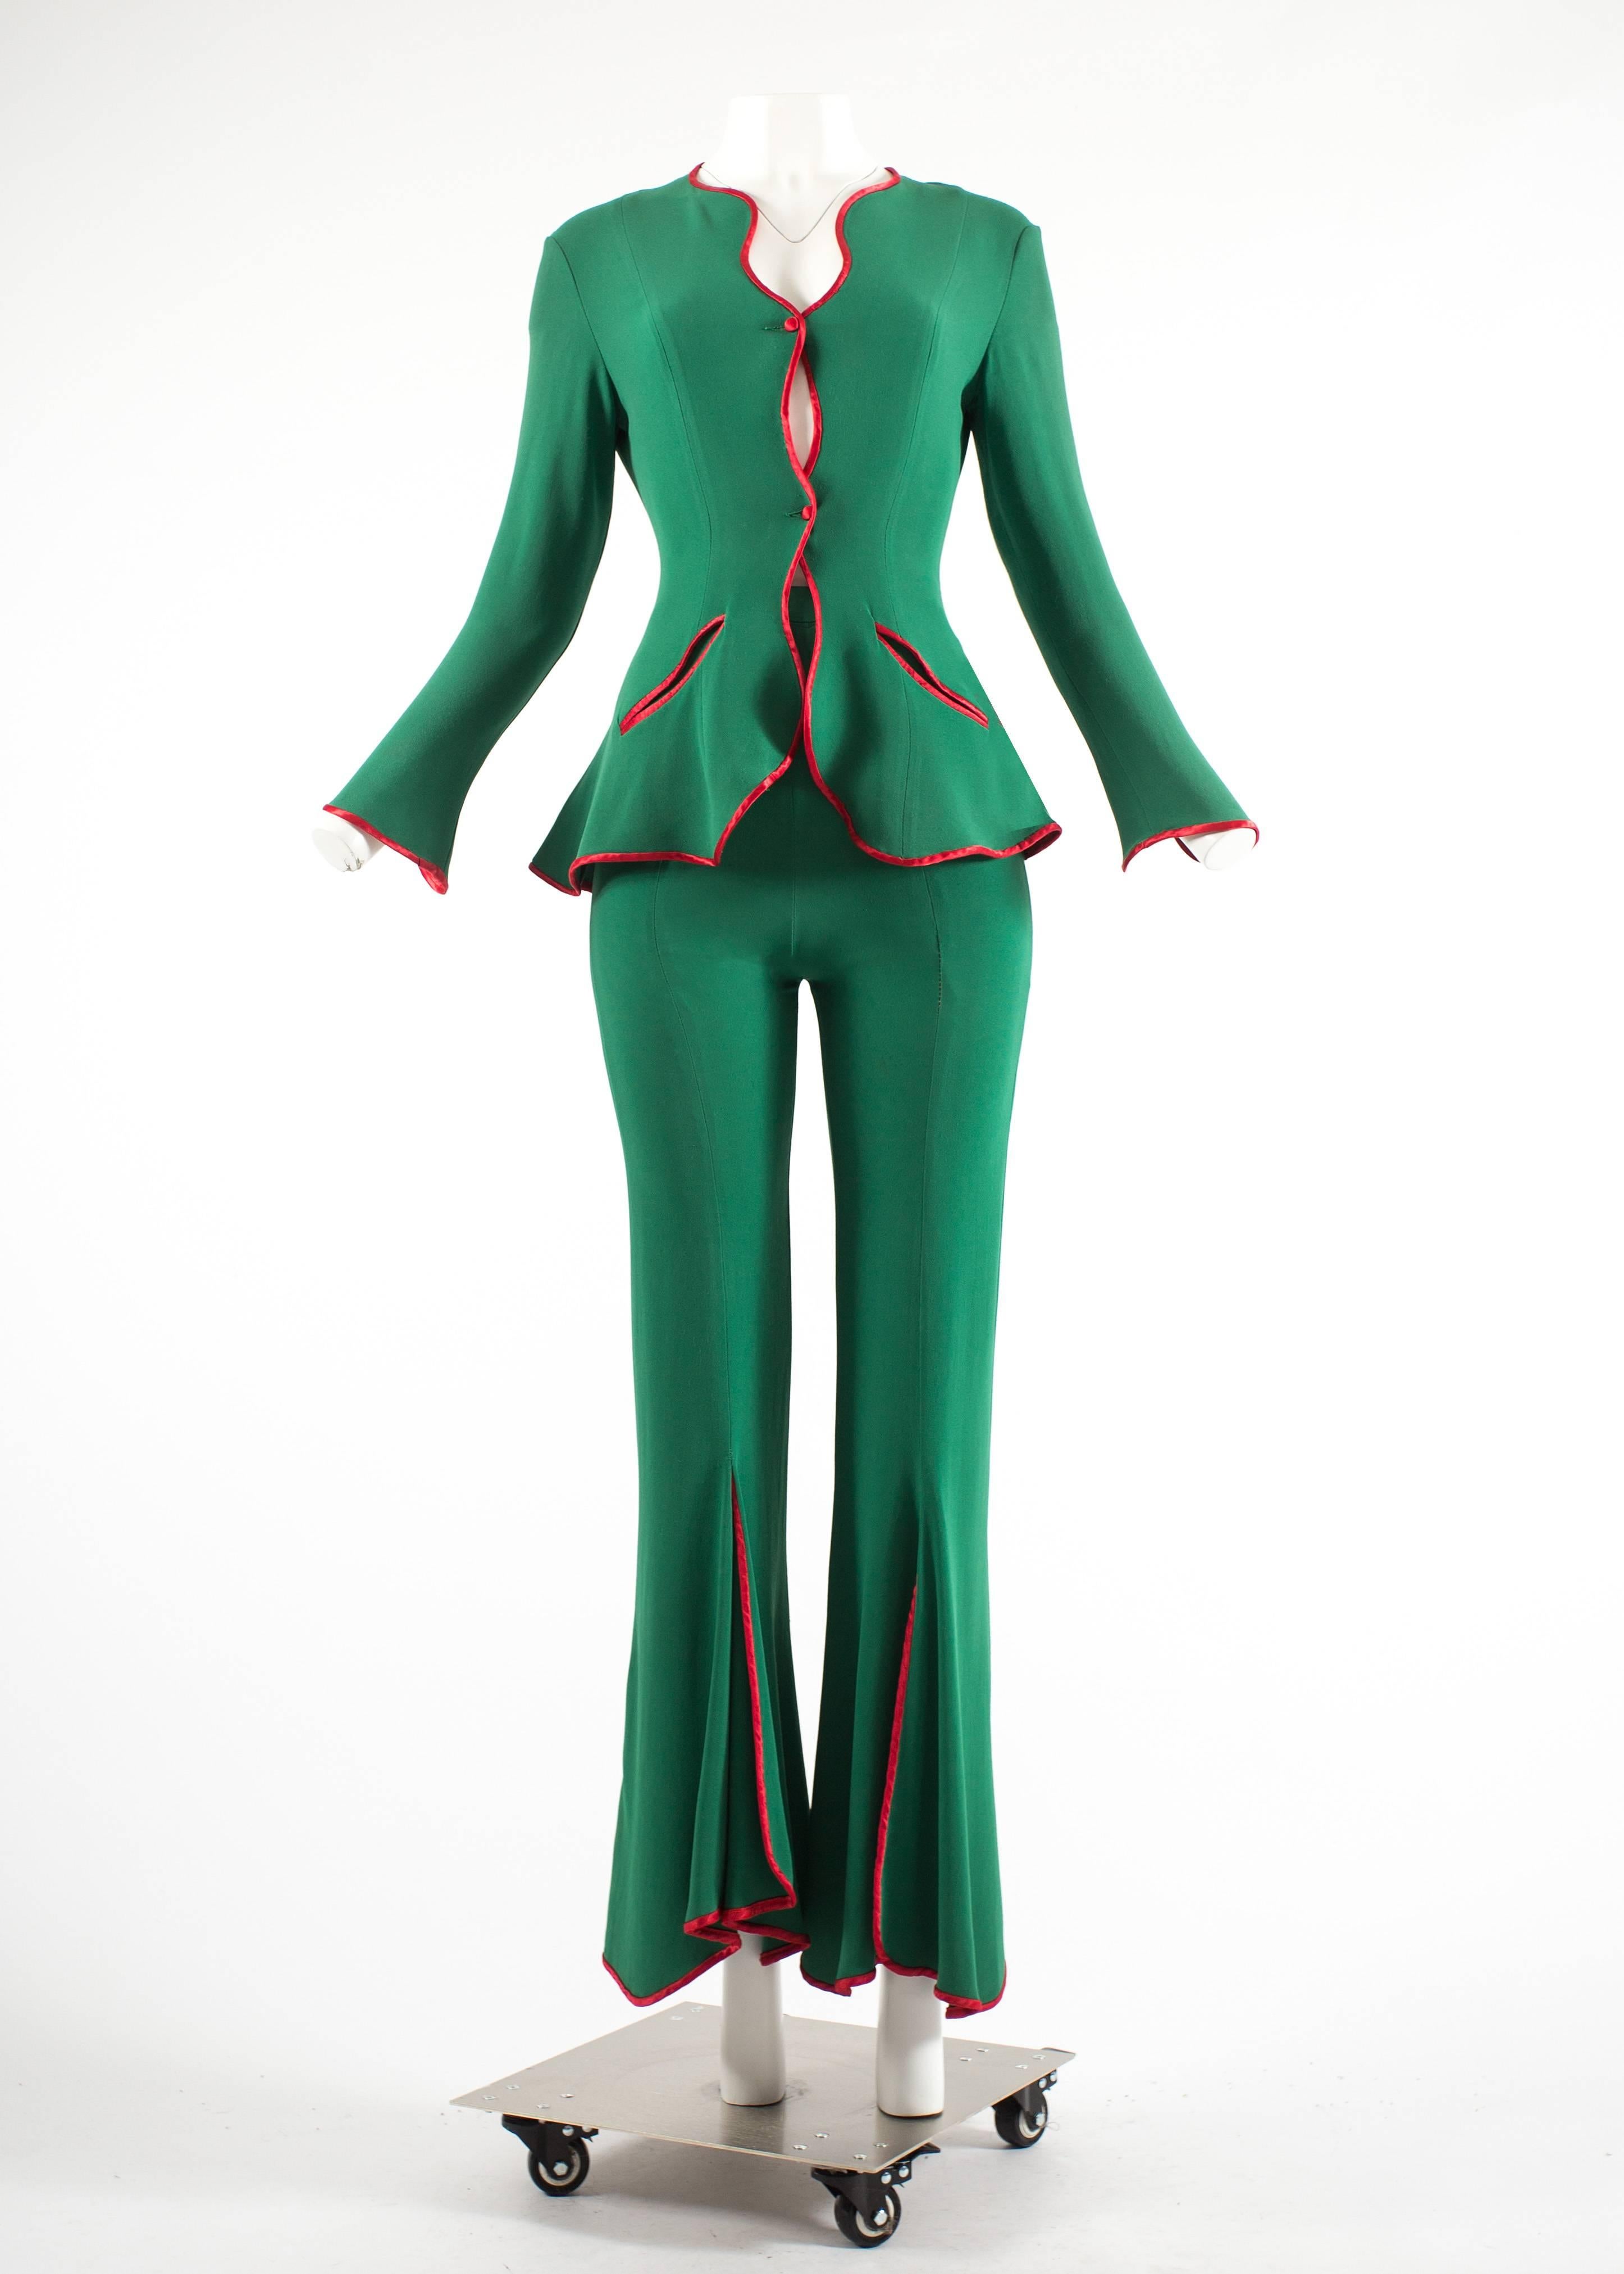 Ossie Clark 1970 green 'Judy' pant suit, with undulating borders piped in red satin.